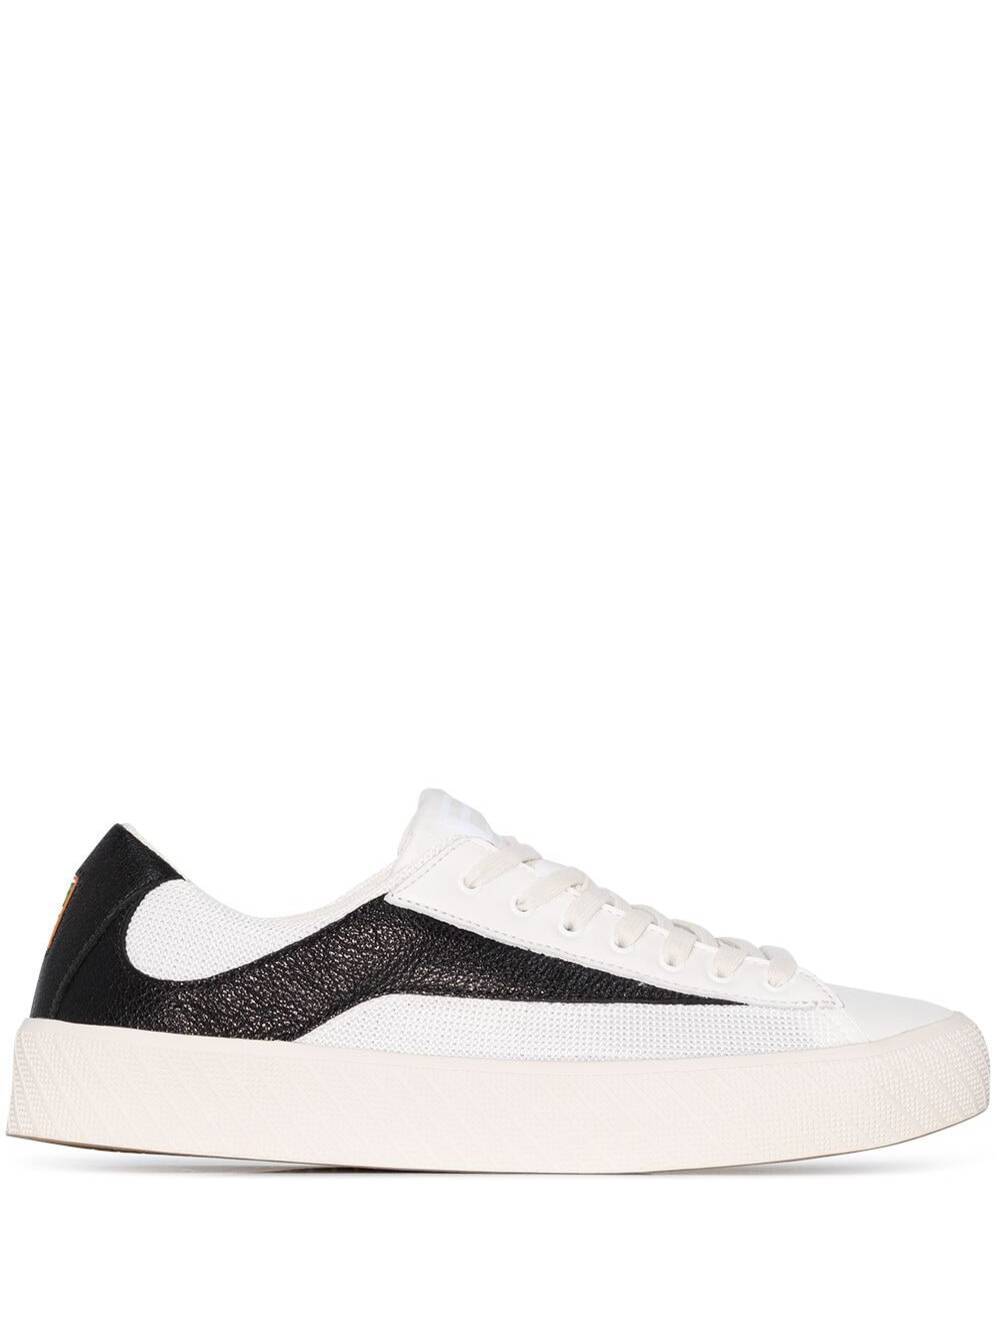 BY FAR Rodina Leather And Fabric Sneakers in black / white